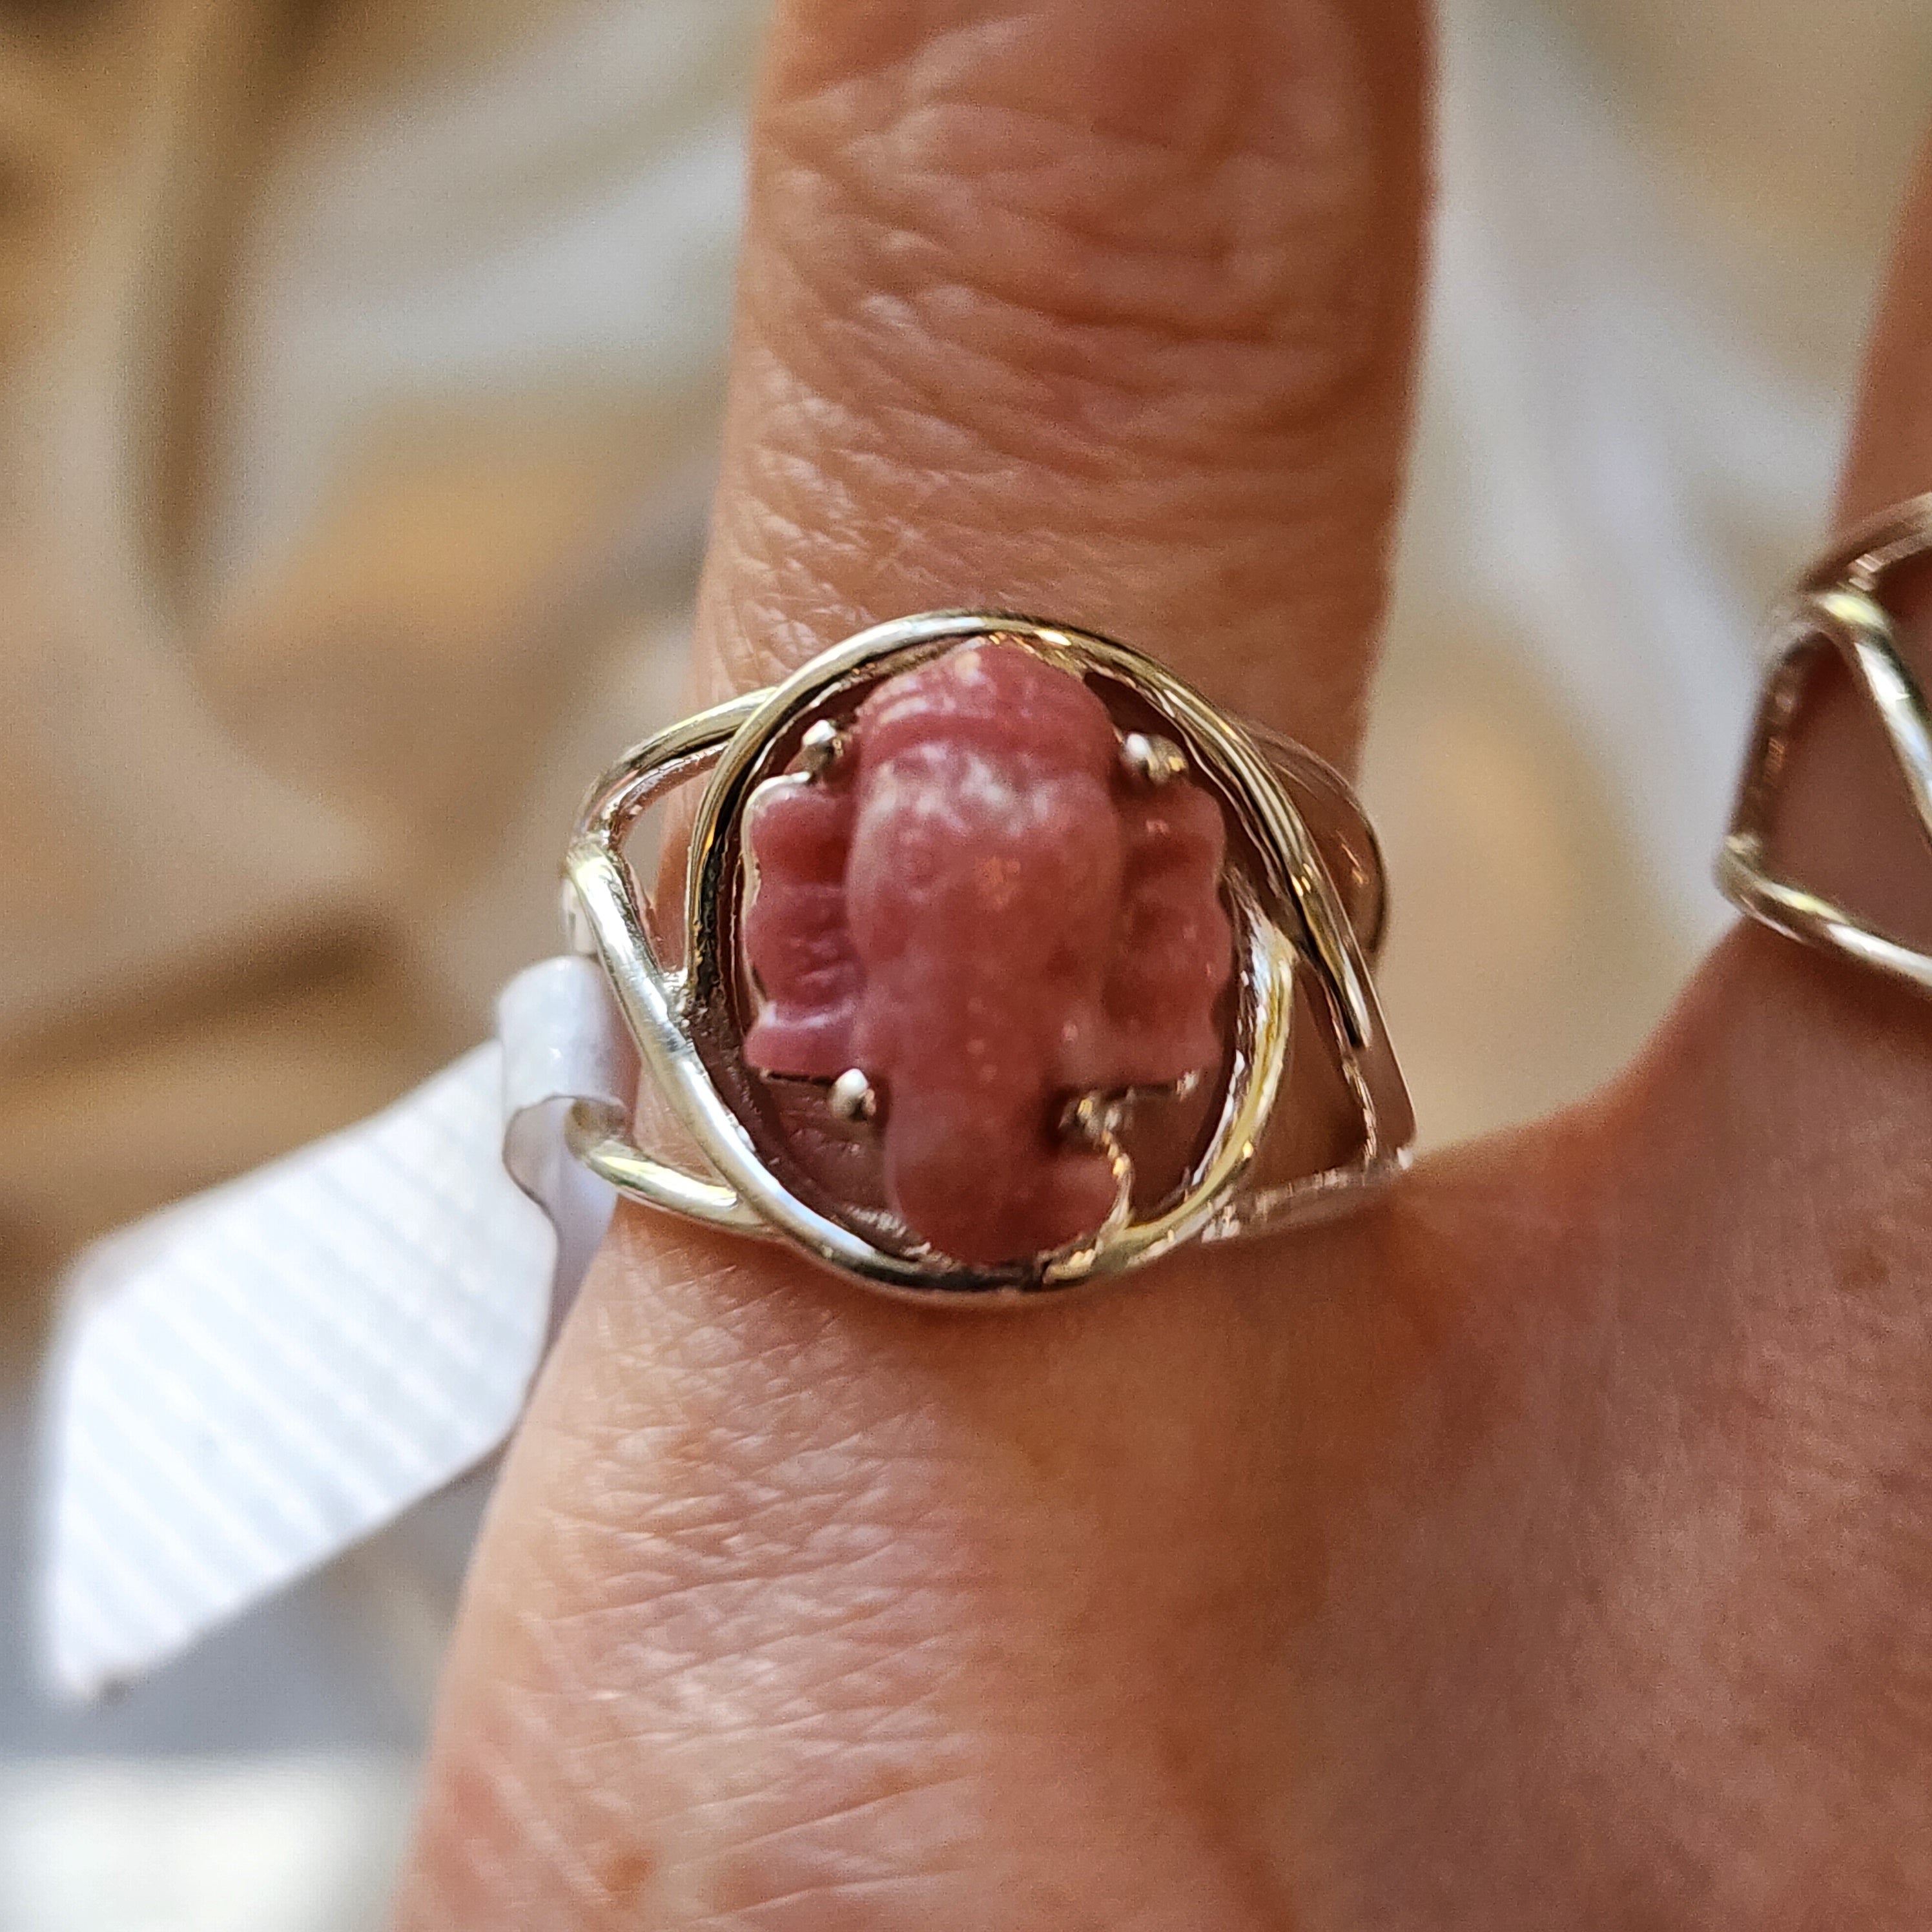 Thulite Ganesha Finger Cuff Adjustable Ring .925 Sterling Silver for Expressing Love, Pleasure & Clearing Blockages